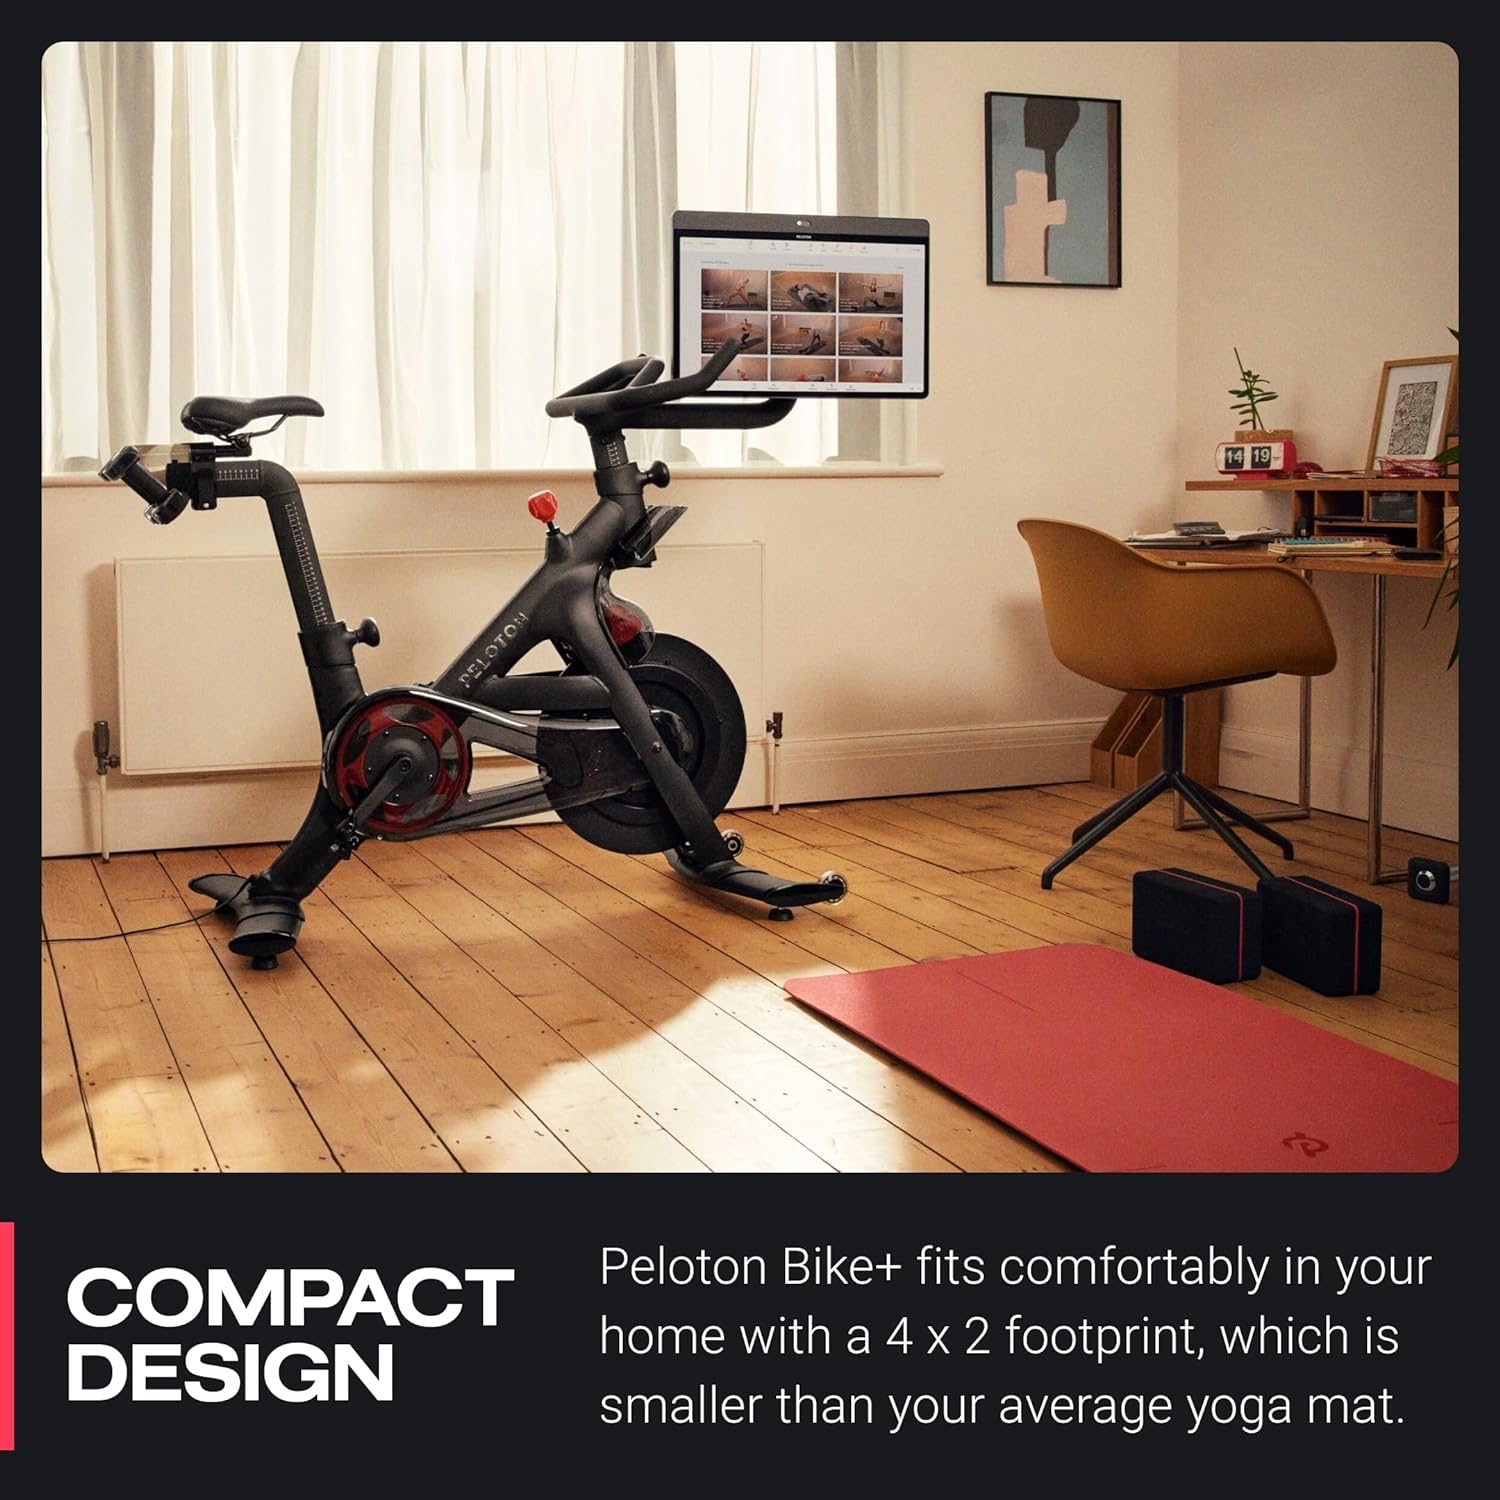 Peloton Bike+ in a home setting with a caption explaining its compact 4x2 foot size compared to a yoga mat